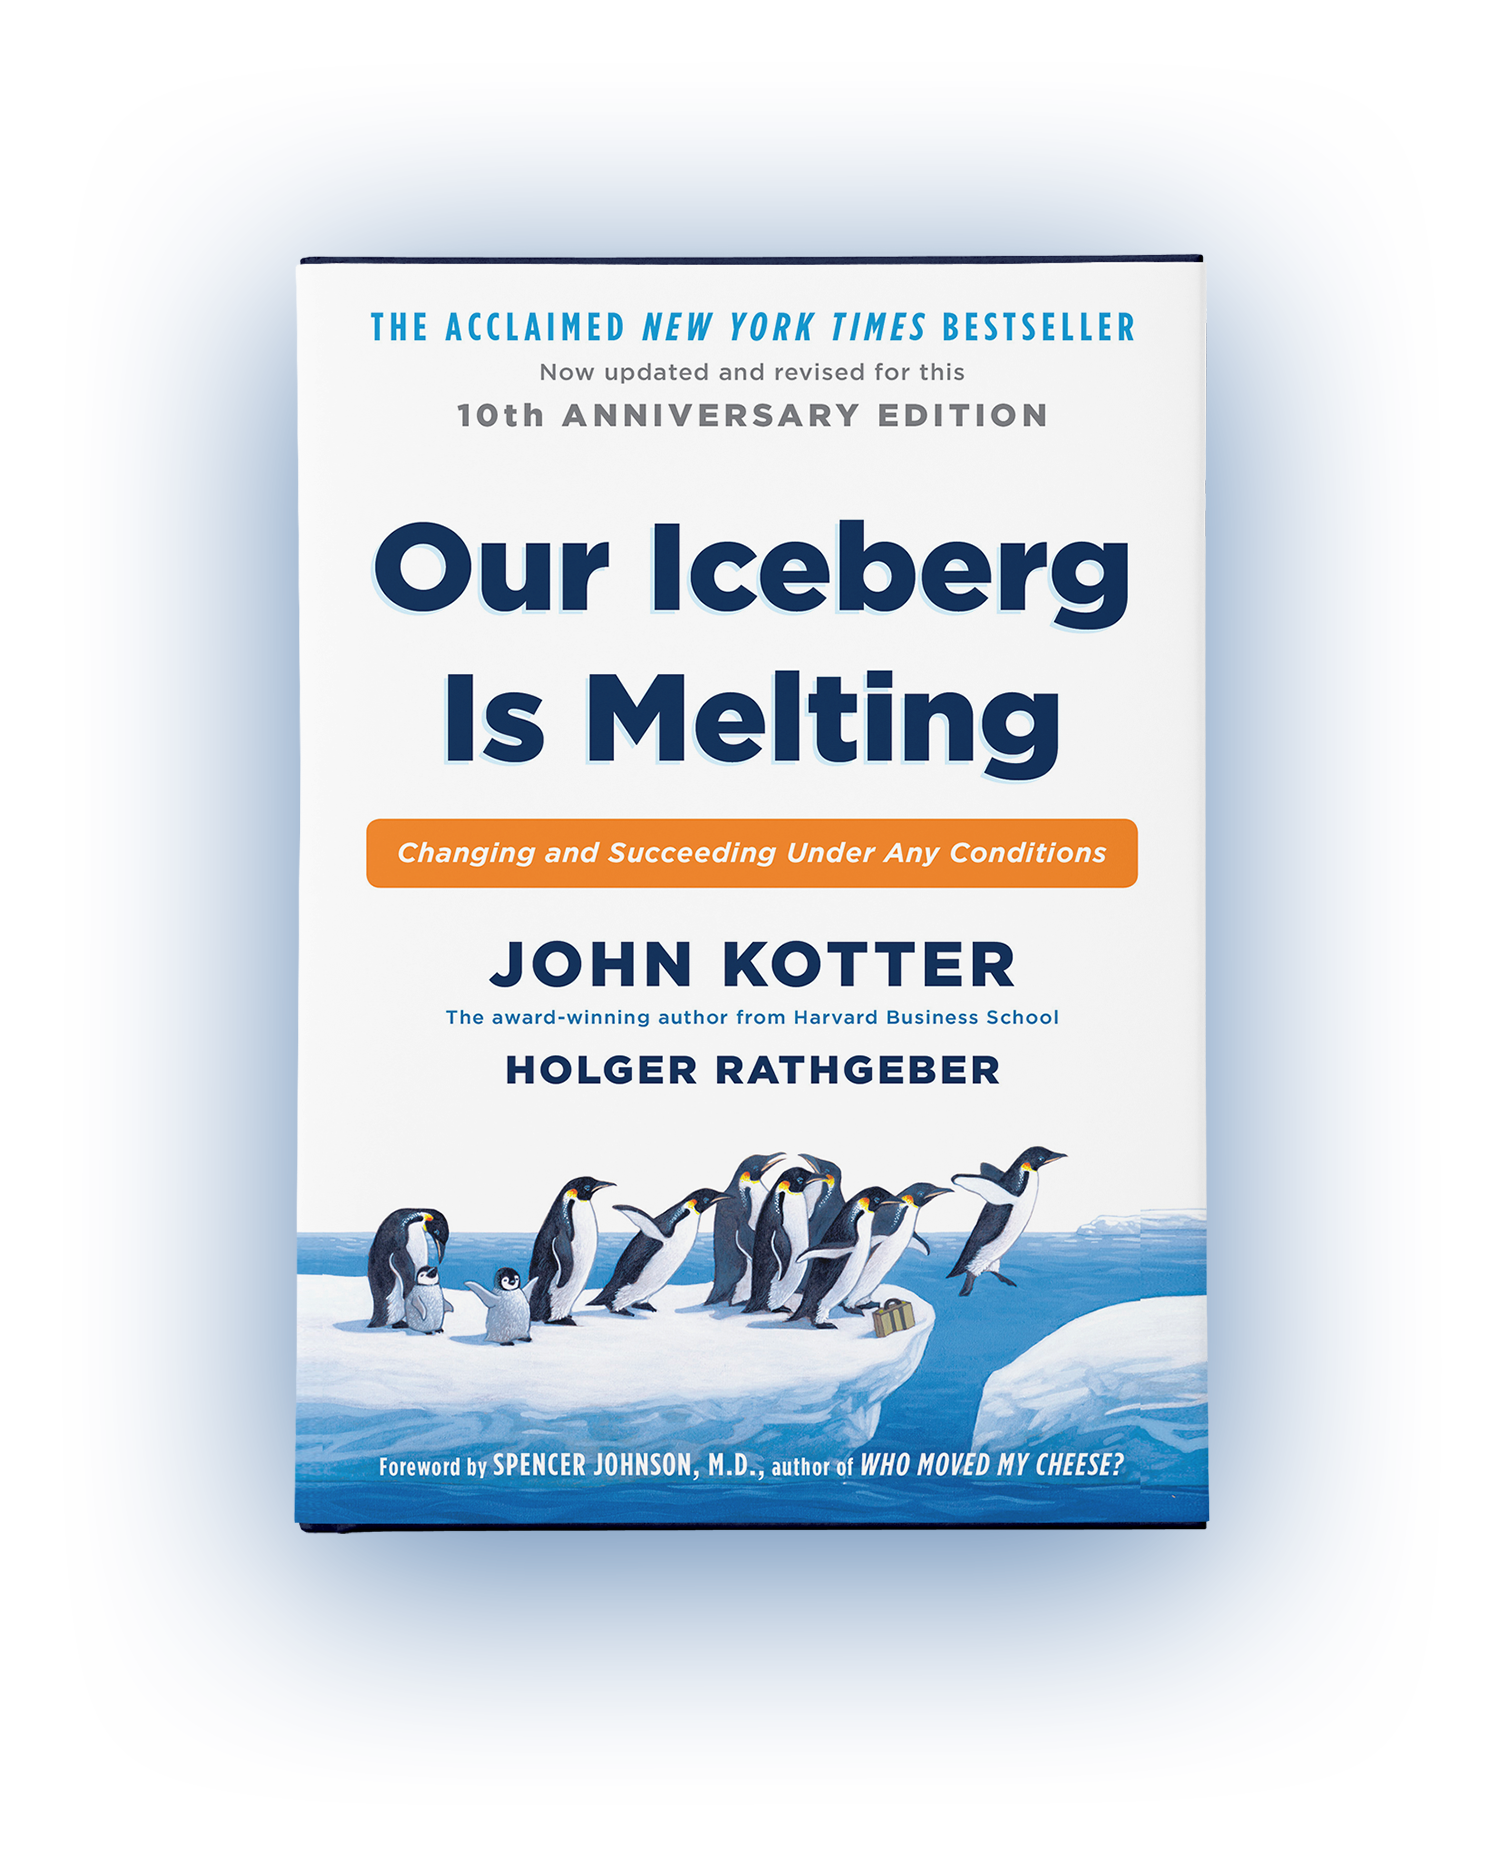 Our Iceberg is Melting: Changing and Succeeding Under Any Conditions, John Kotter